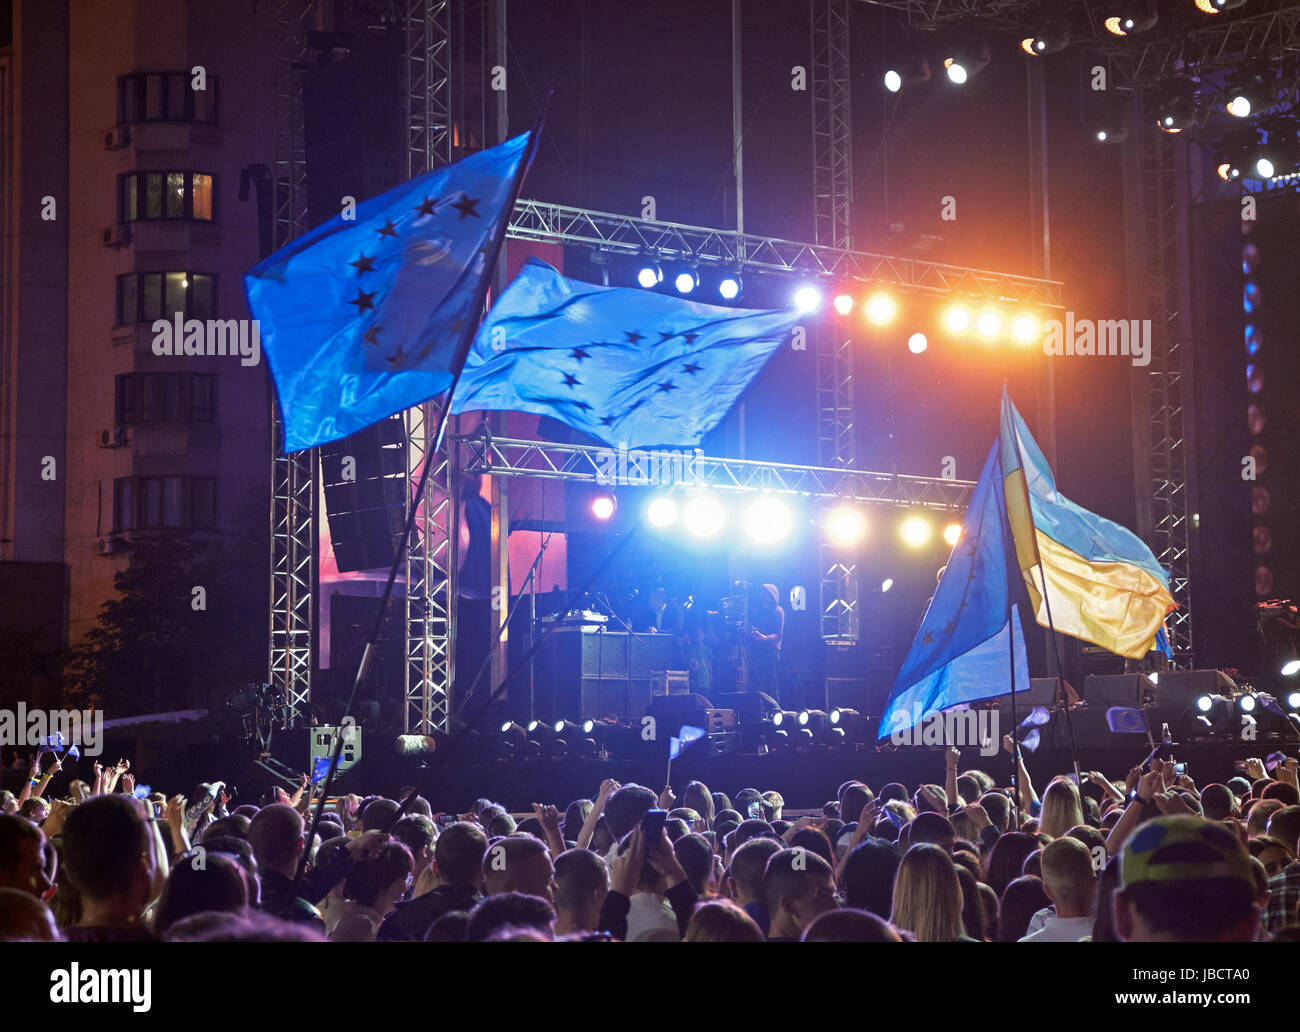 Kiev, Ukraine. 10th June, 2017. EU and Ukrainian flags over the crowd at European Square in Kyiv during concert devoted to canceling EU short-stay visa requirements for Ukrainian citizens Credit: Dmytro Aliokhin/Alamy Live News Stock Photo